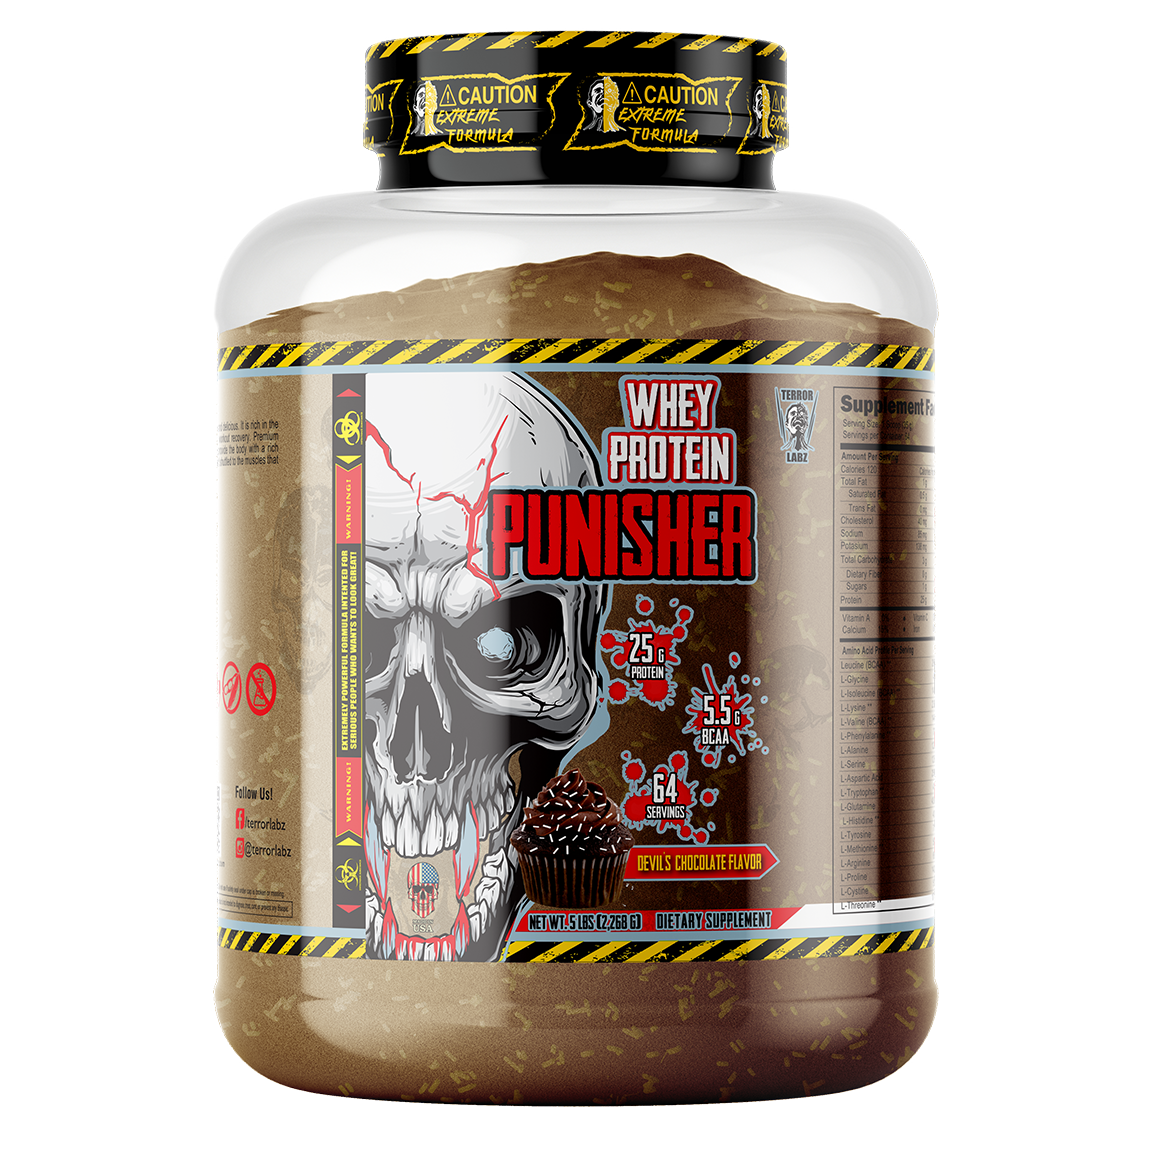 PUNISHER, Whey Protein, 25g Protein, 5.5g BCAA, 64 Servings